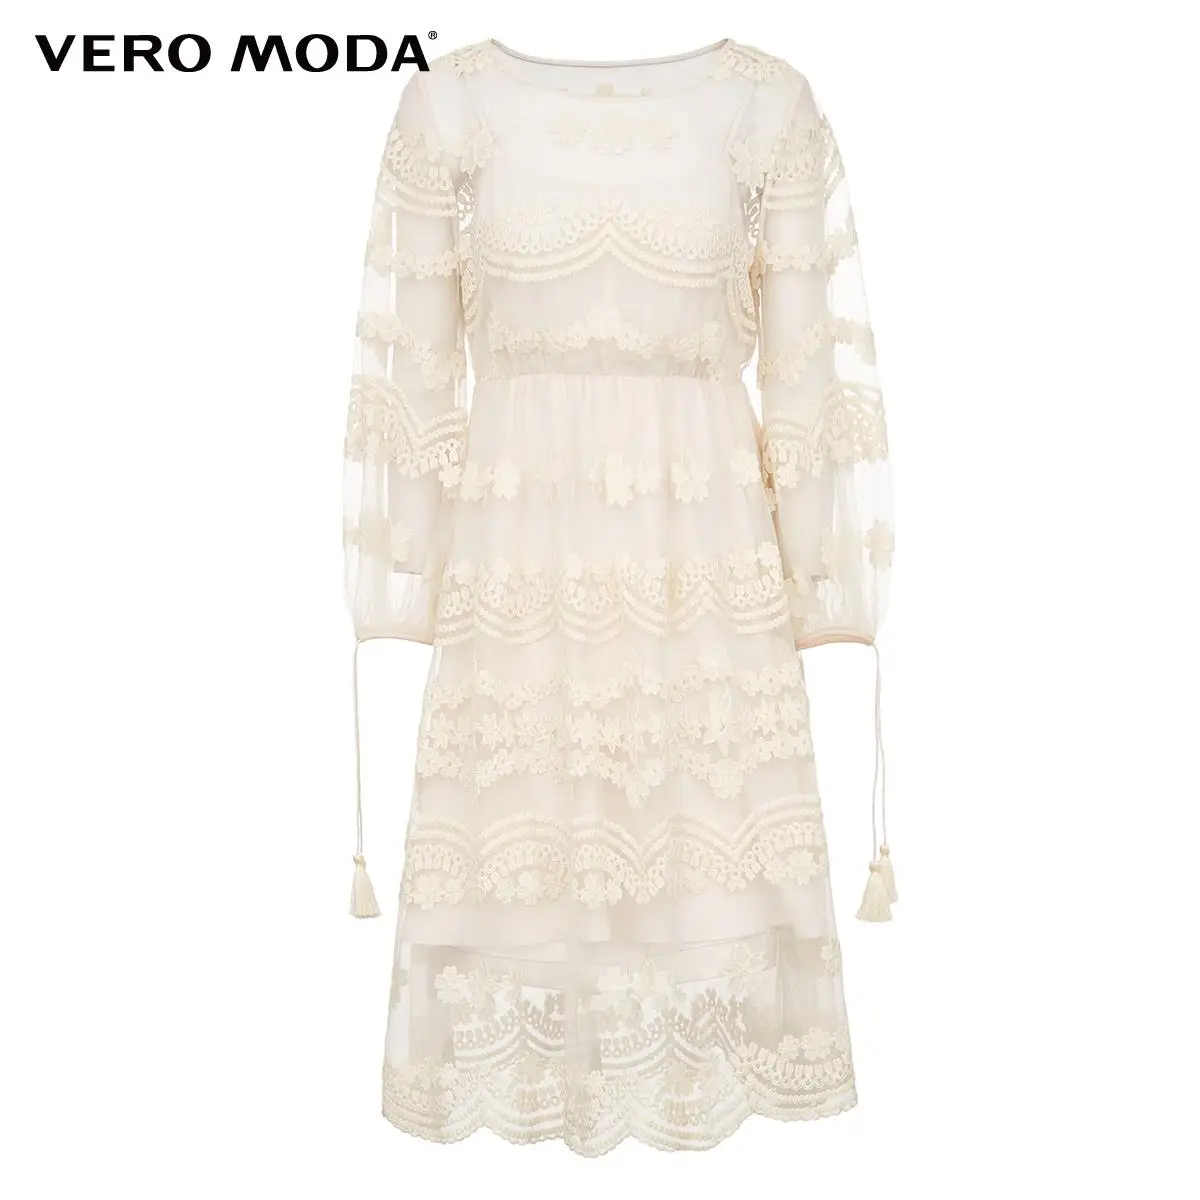 Invitere Violin ved godt Vero Moda Women Vintage Ethnic Style Mesh Embroidered See-through Party  Dress | 32027C503 _ - AliExpress Mobile